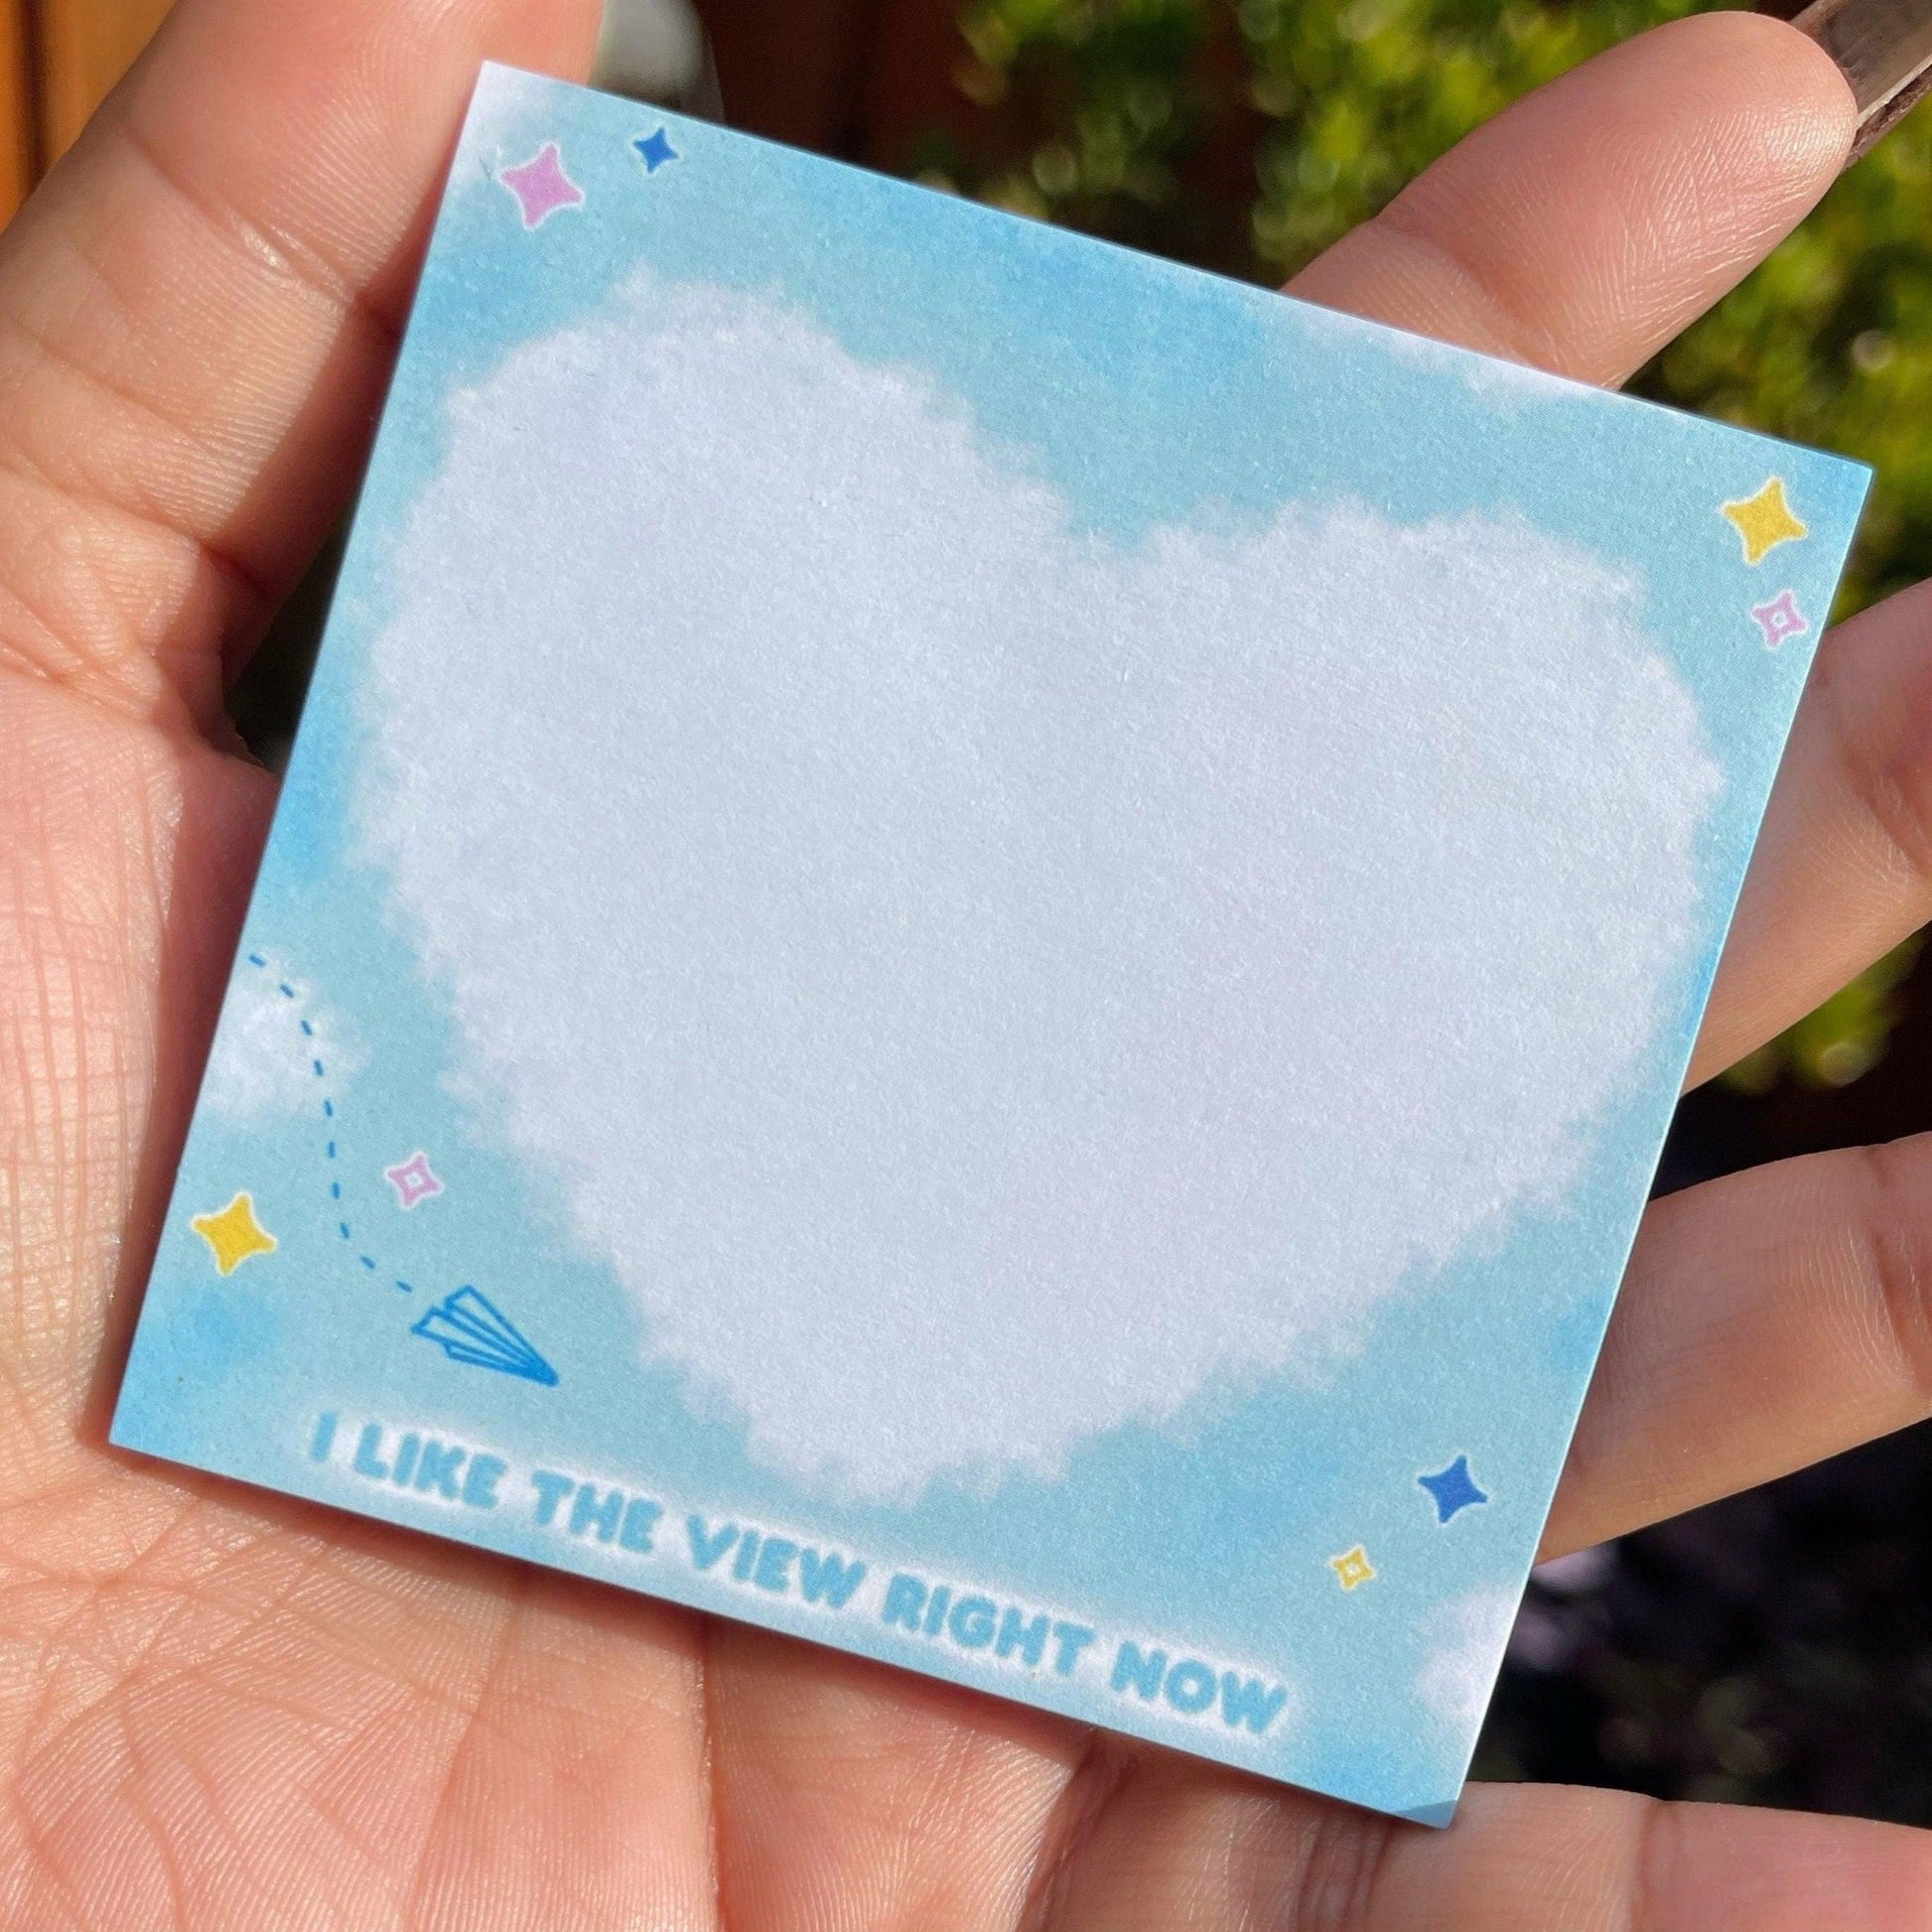 NEWWW cloud shaped sticky notes are available in our shop now